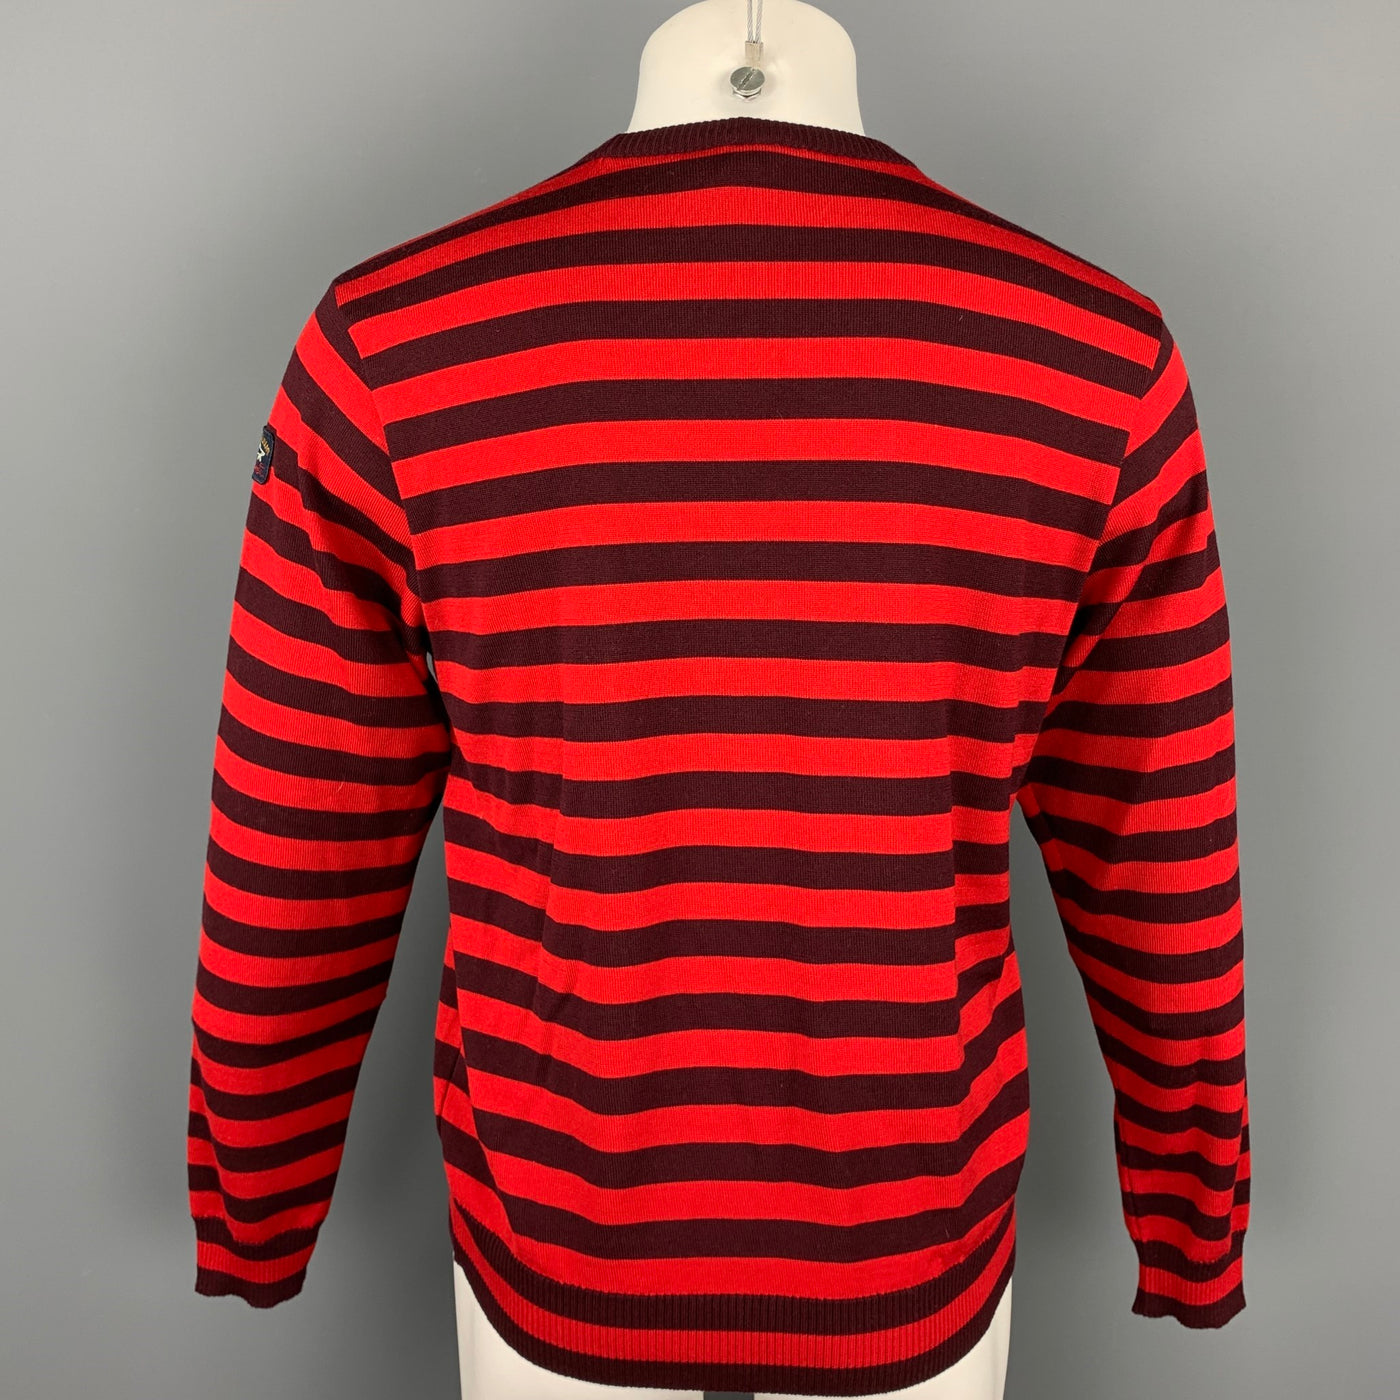 NICK WOOSTER x PAUL SHARK Size M Red & Brown Stripe Wool Crew-Neck Pullover Sweater